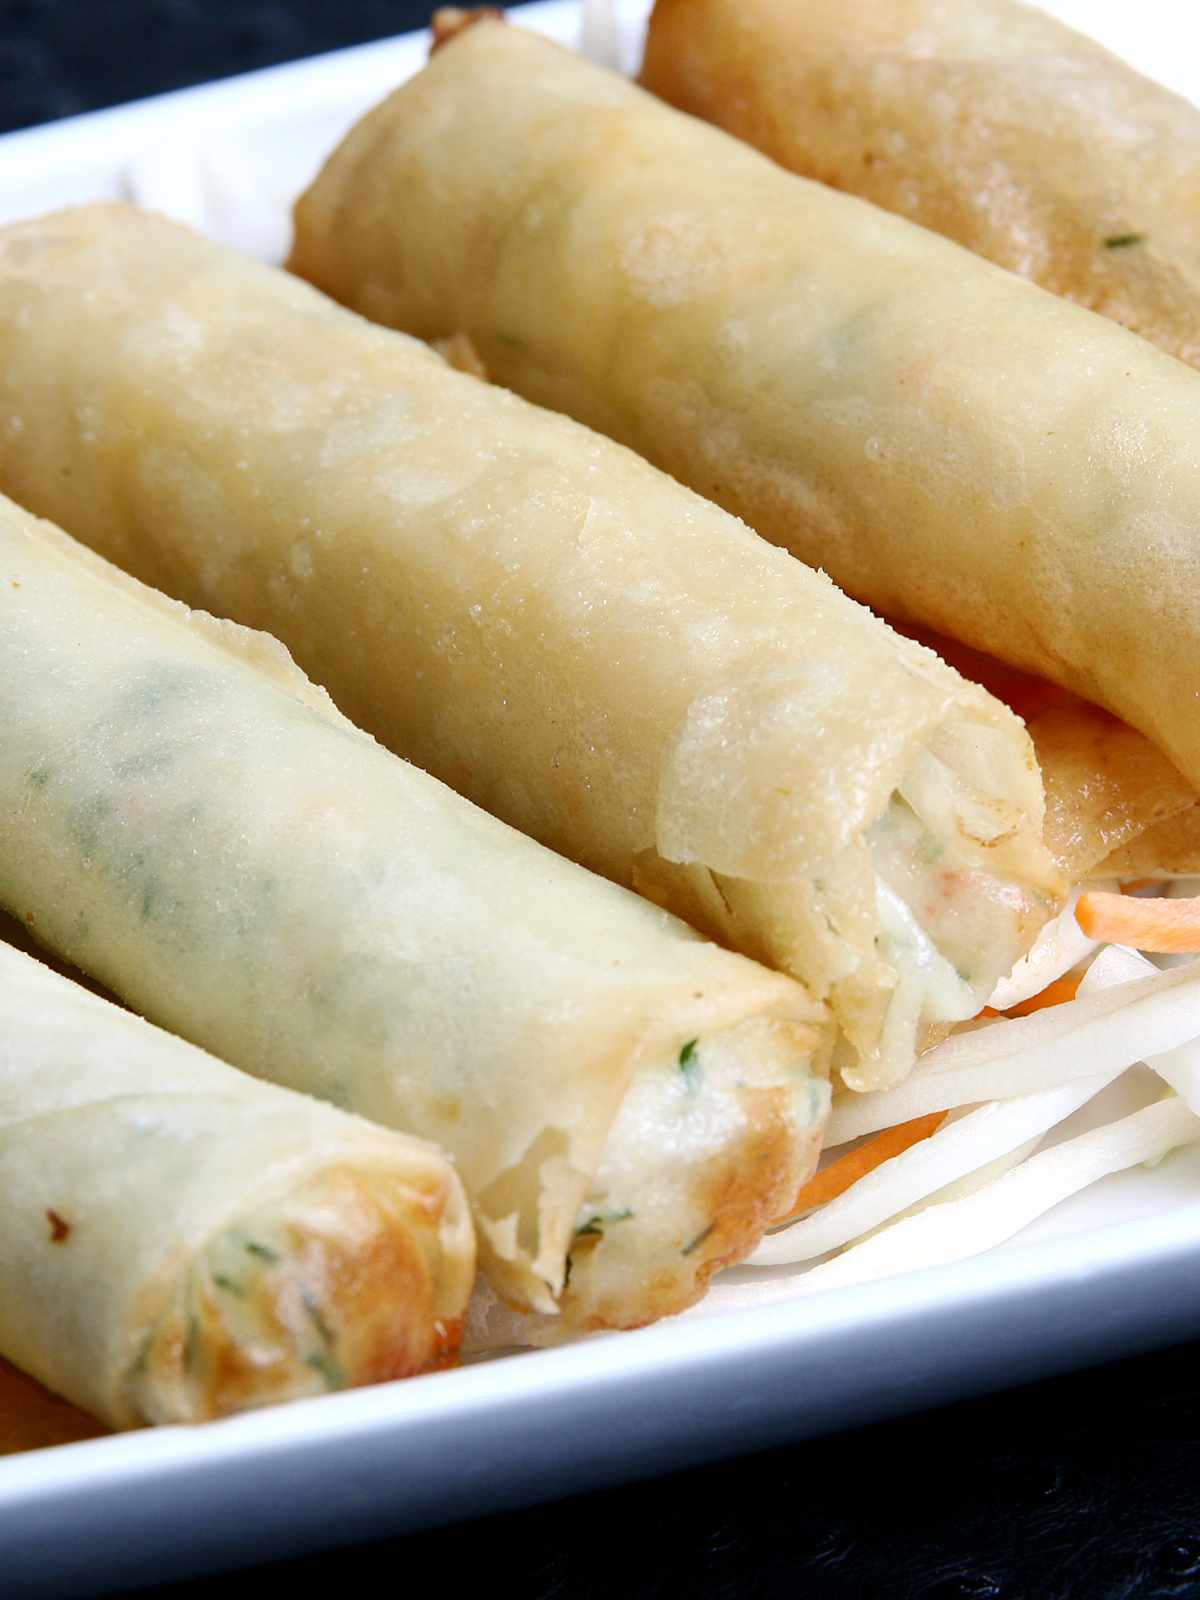 tray of lumpia served with dipping sauce.